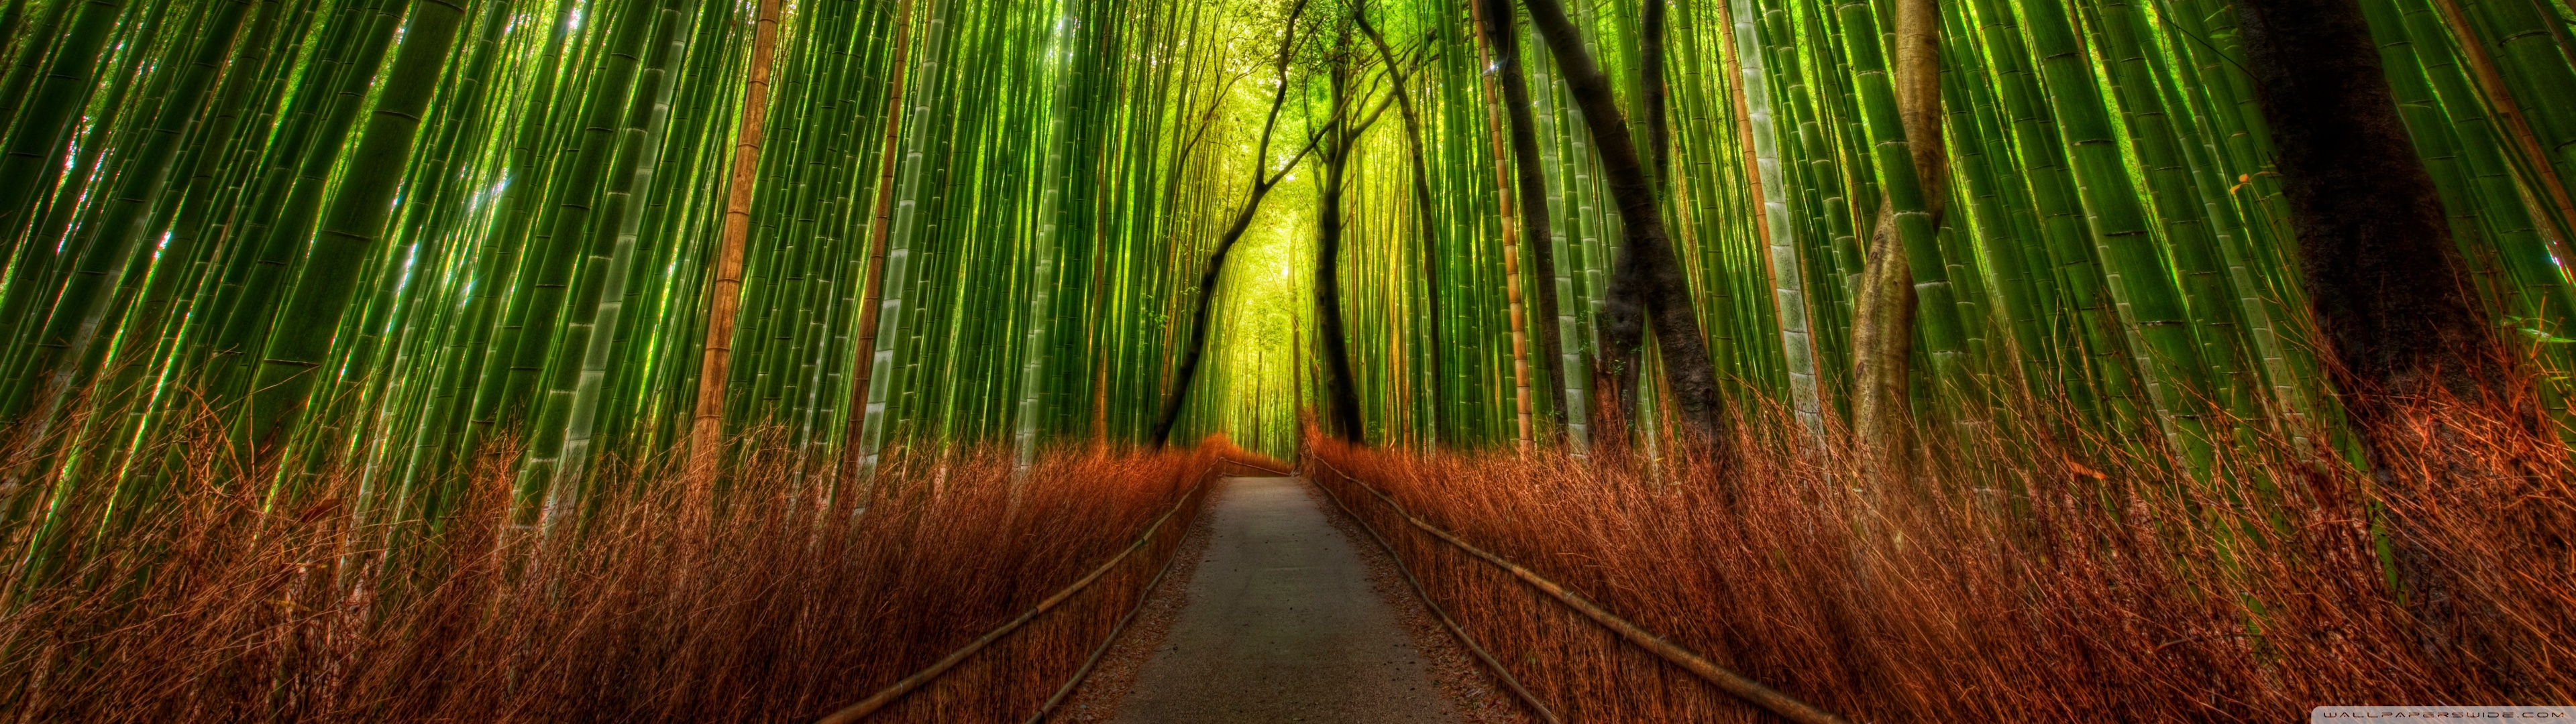 Bamboo forest ultra hd desktop background wallpaper for multi display dual monitor tablet smartphone